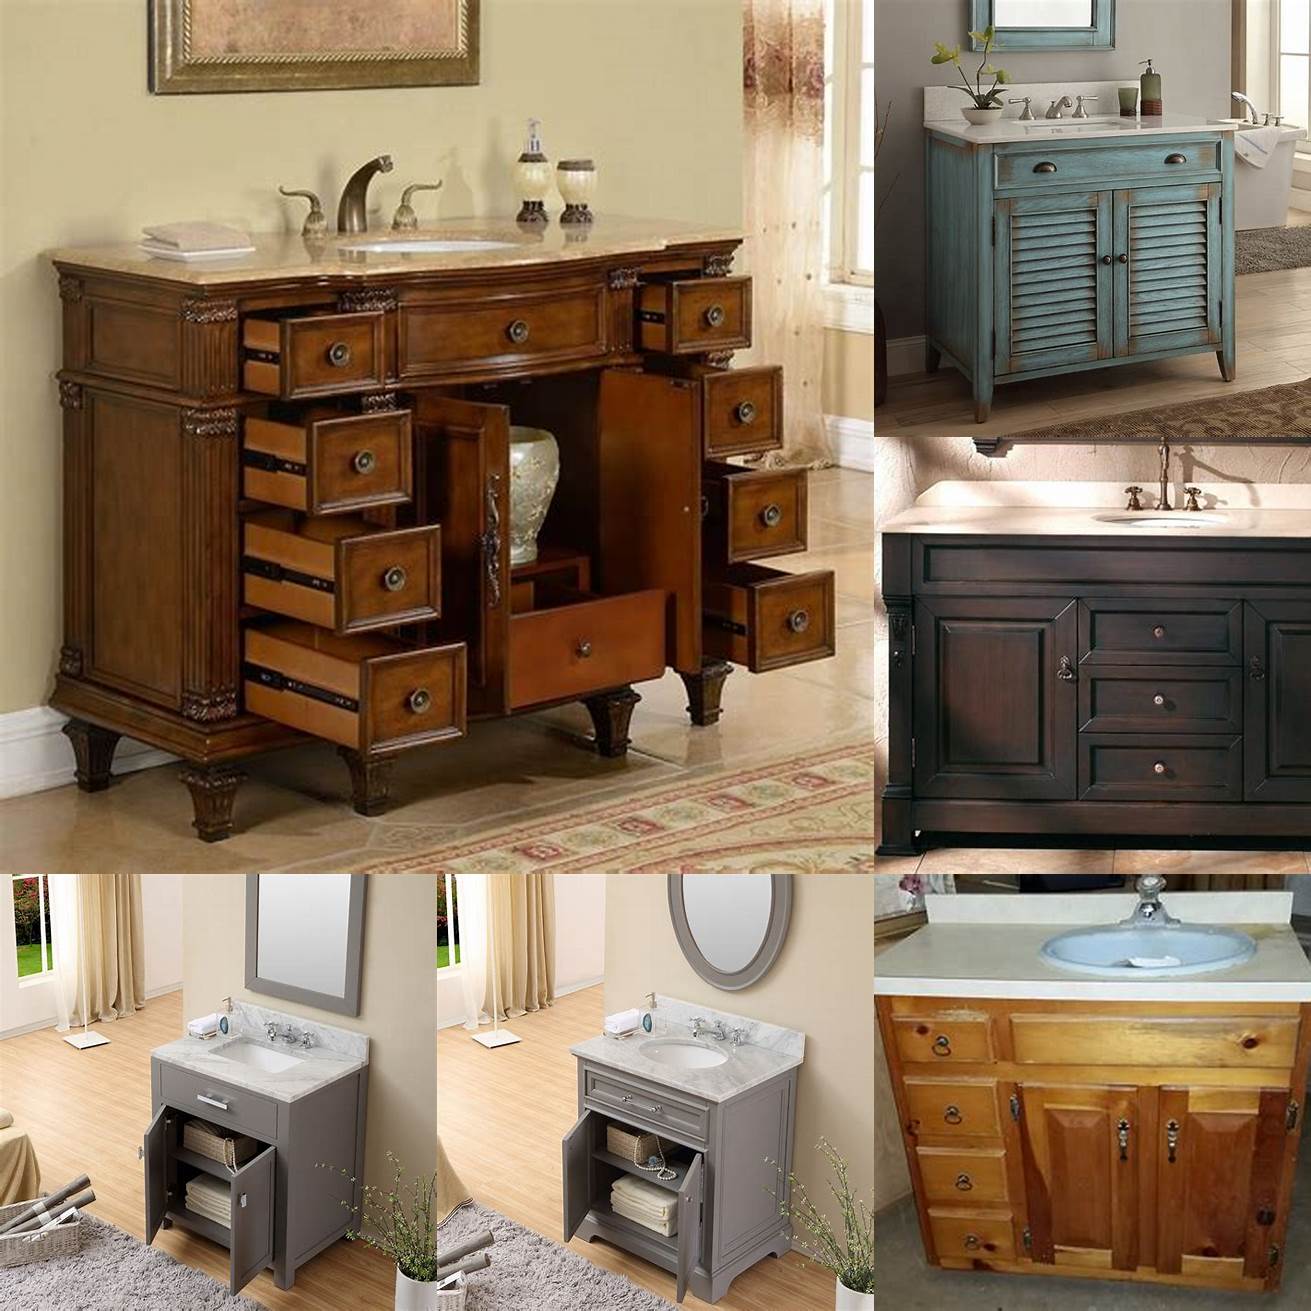 Secondhand stores You may be able to find a great deal on a used bathroom vanity at a secondhand store or online marketplace like Craigslist or Facebook Marketplace